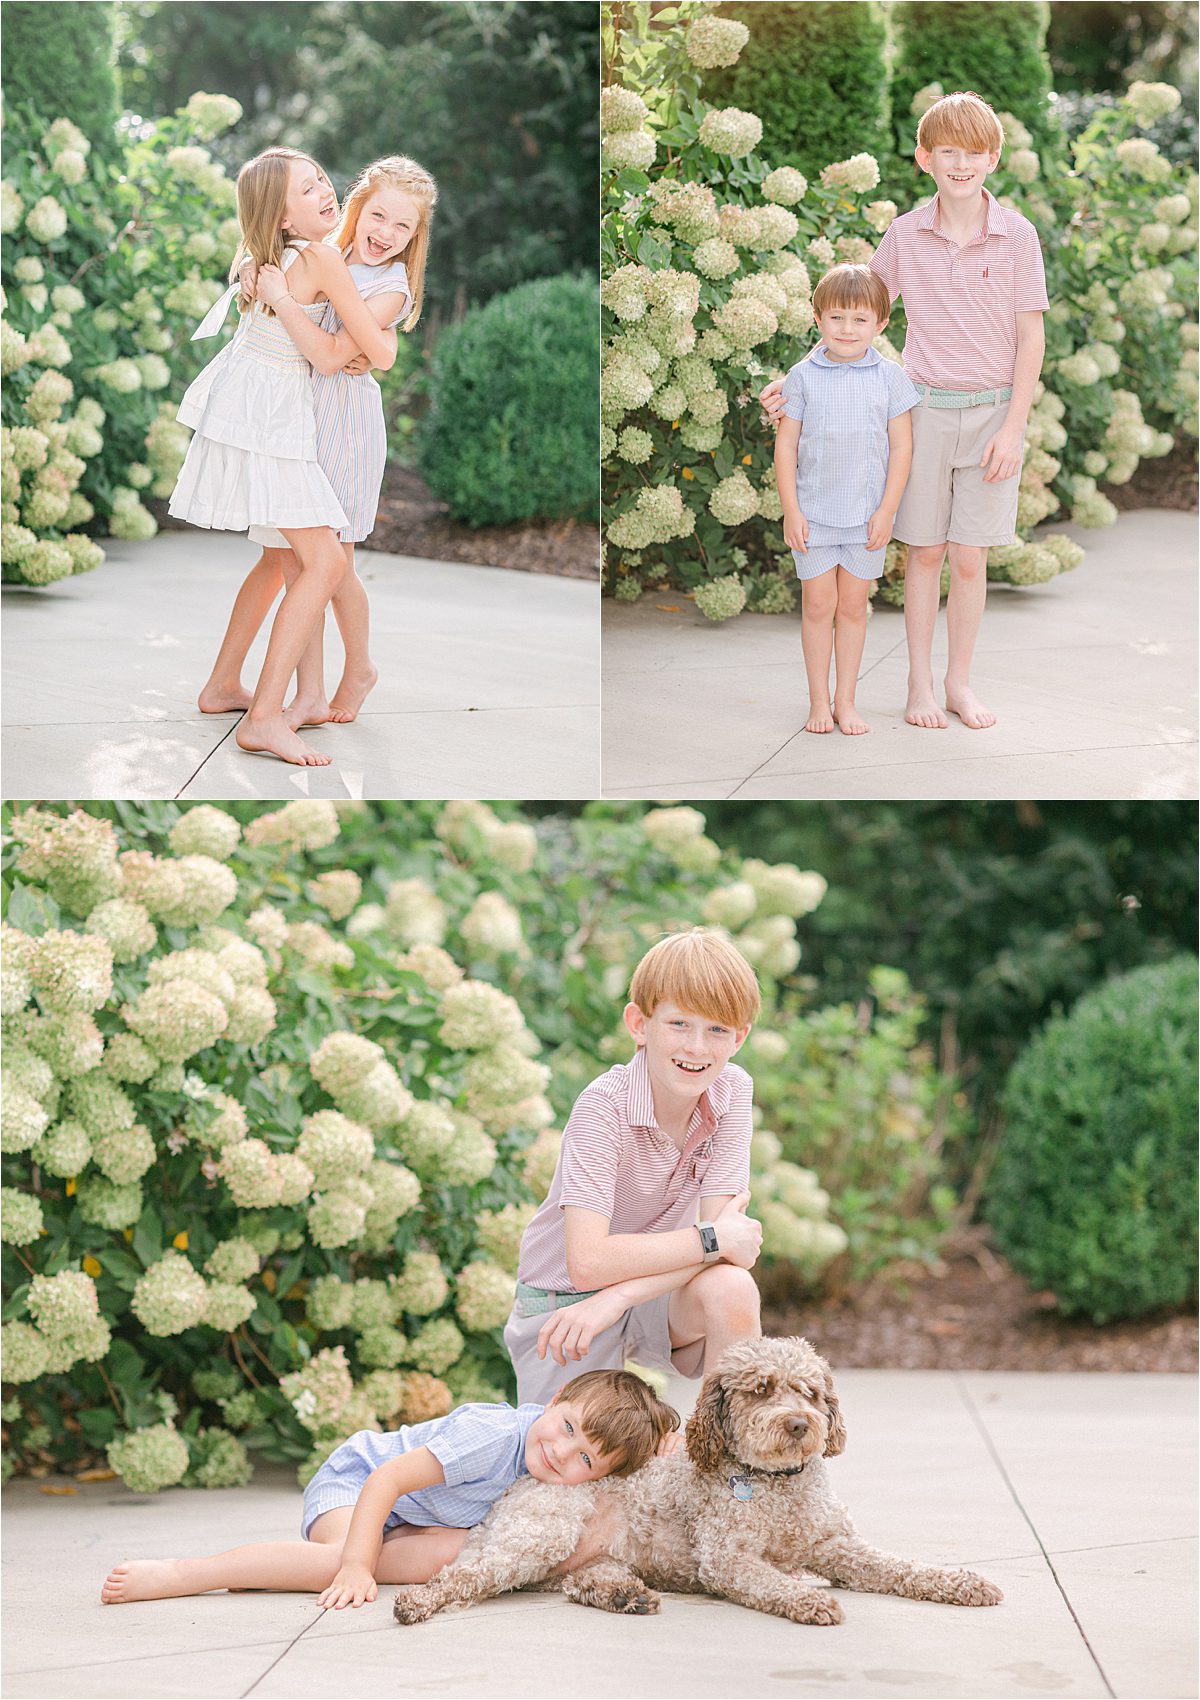 Fun sibling outdoor family photo shoot in Athens, GA with dog